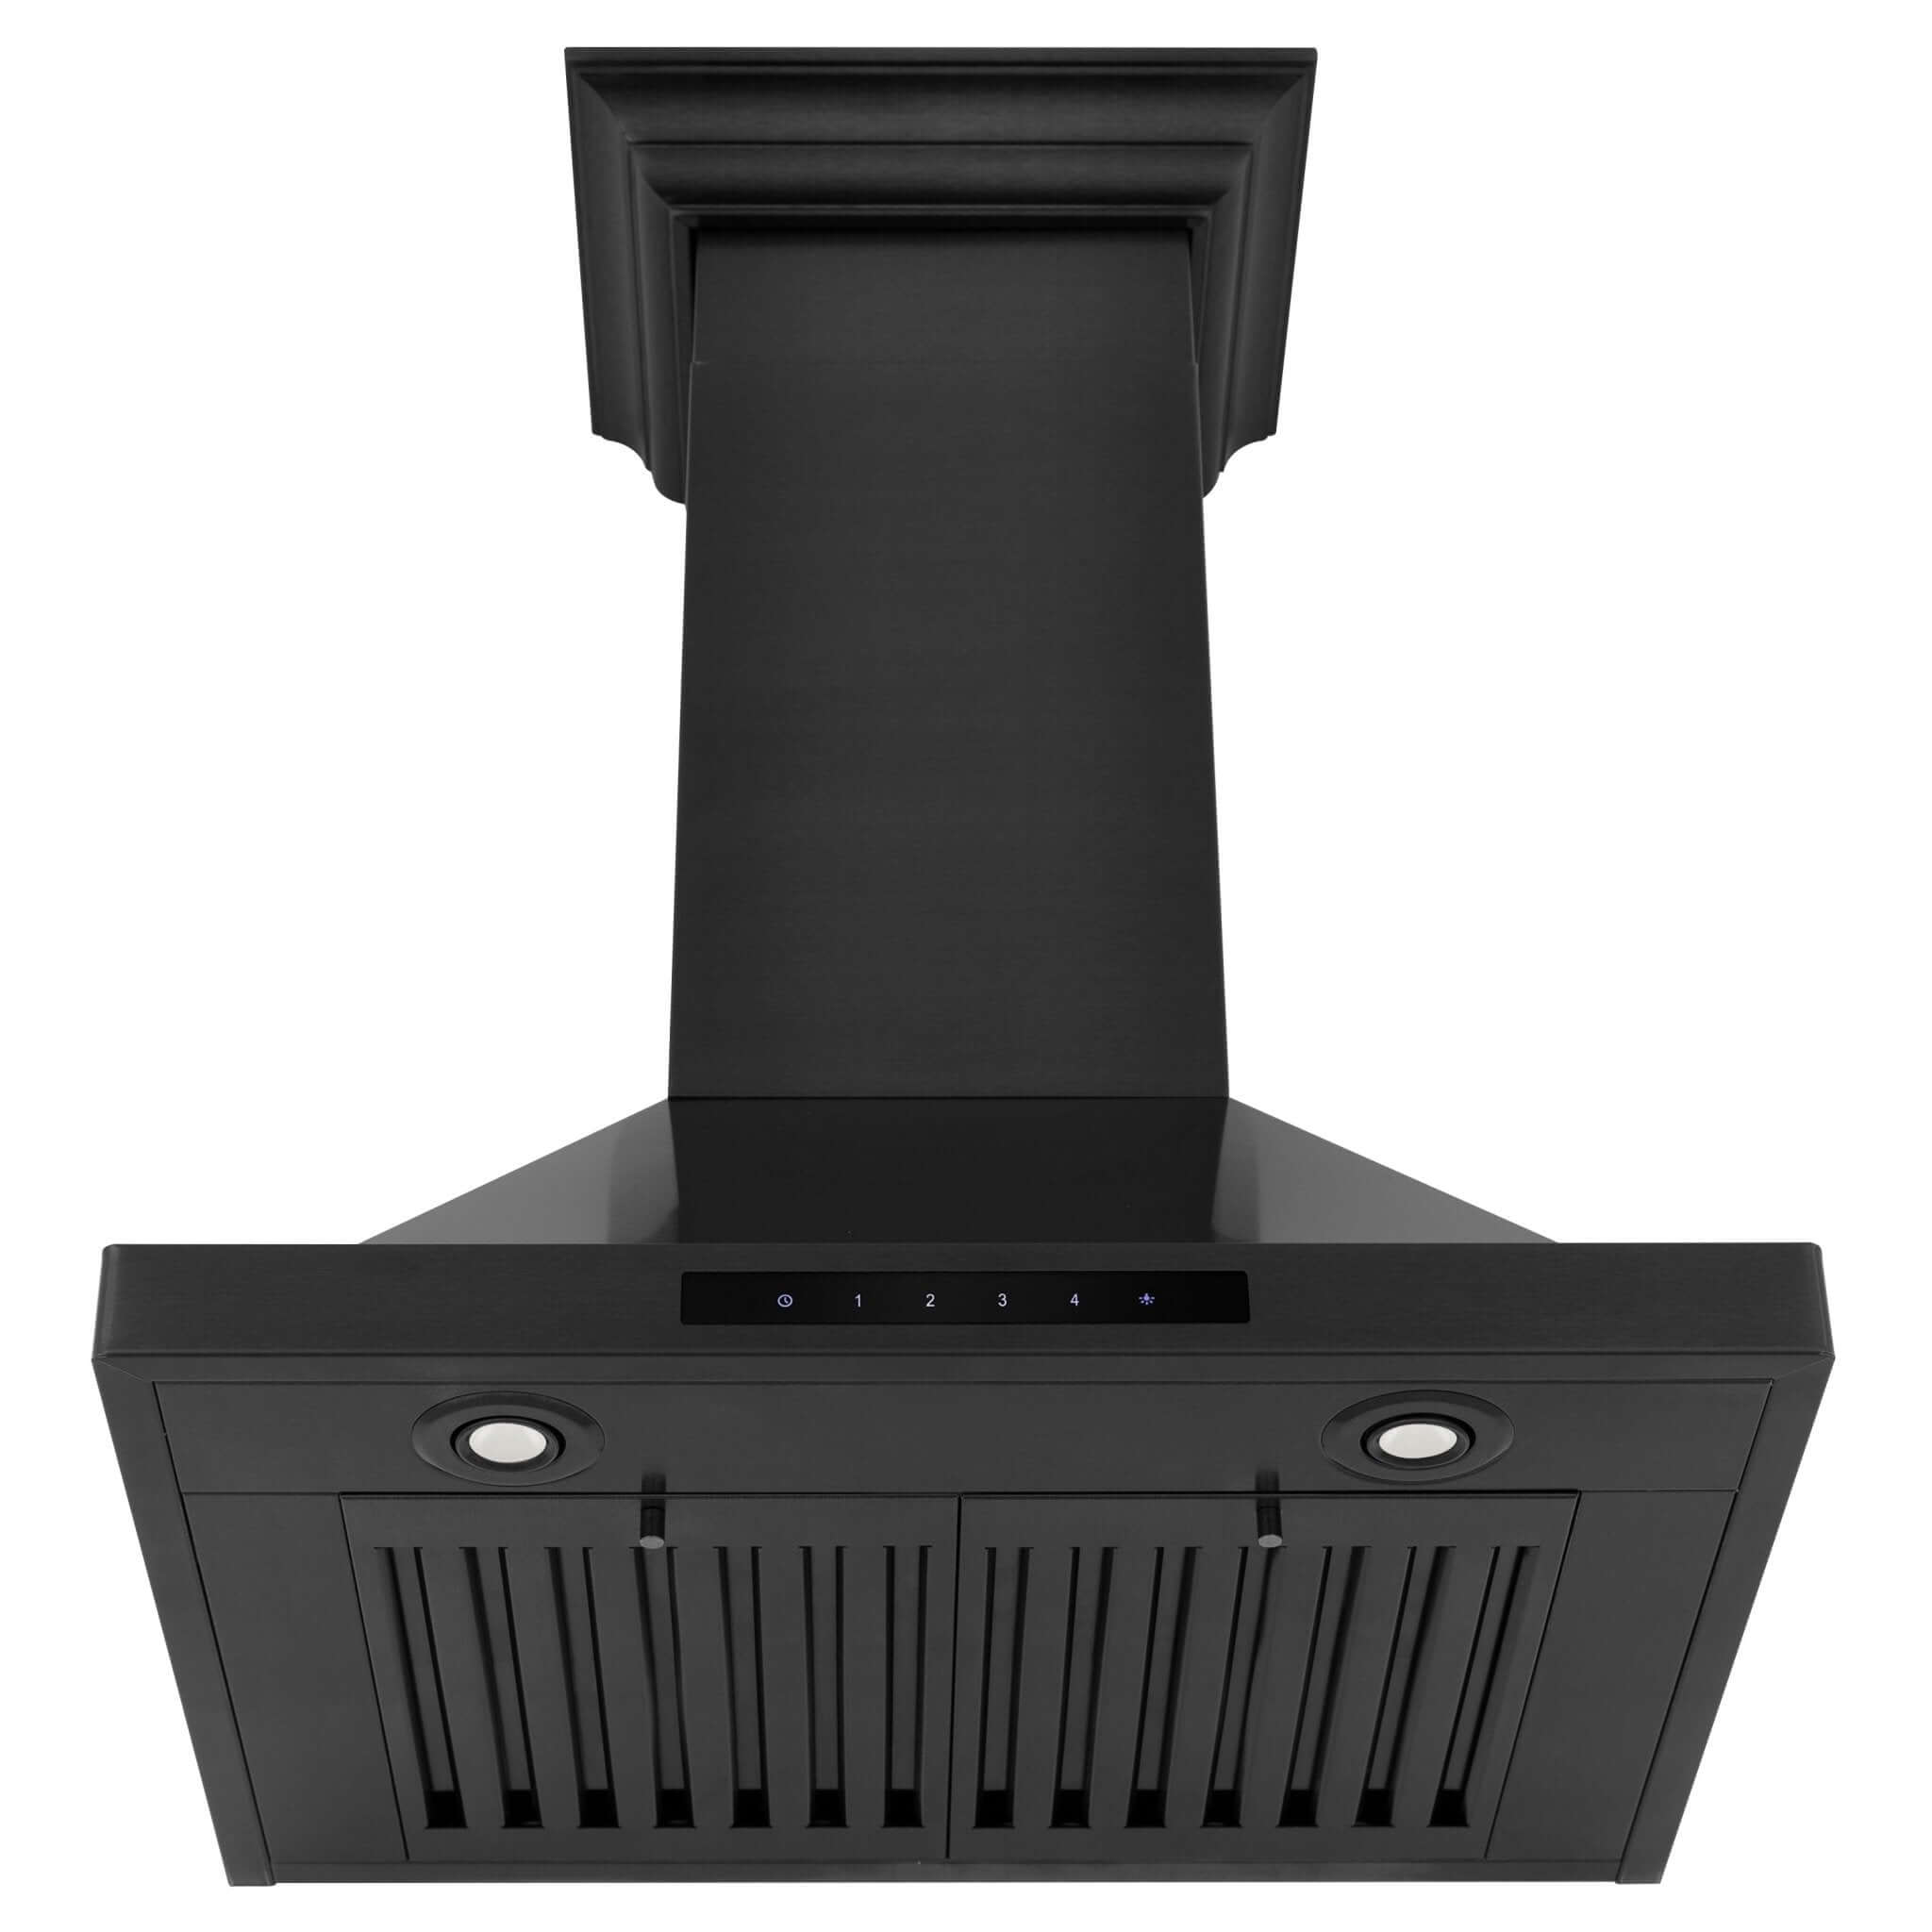 ZLINE Convertible Vent Wall Mount Range Hood in Black Stainless Steel with Crown Molding (BSKBNCRN) front under